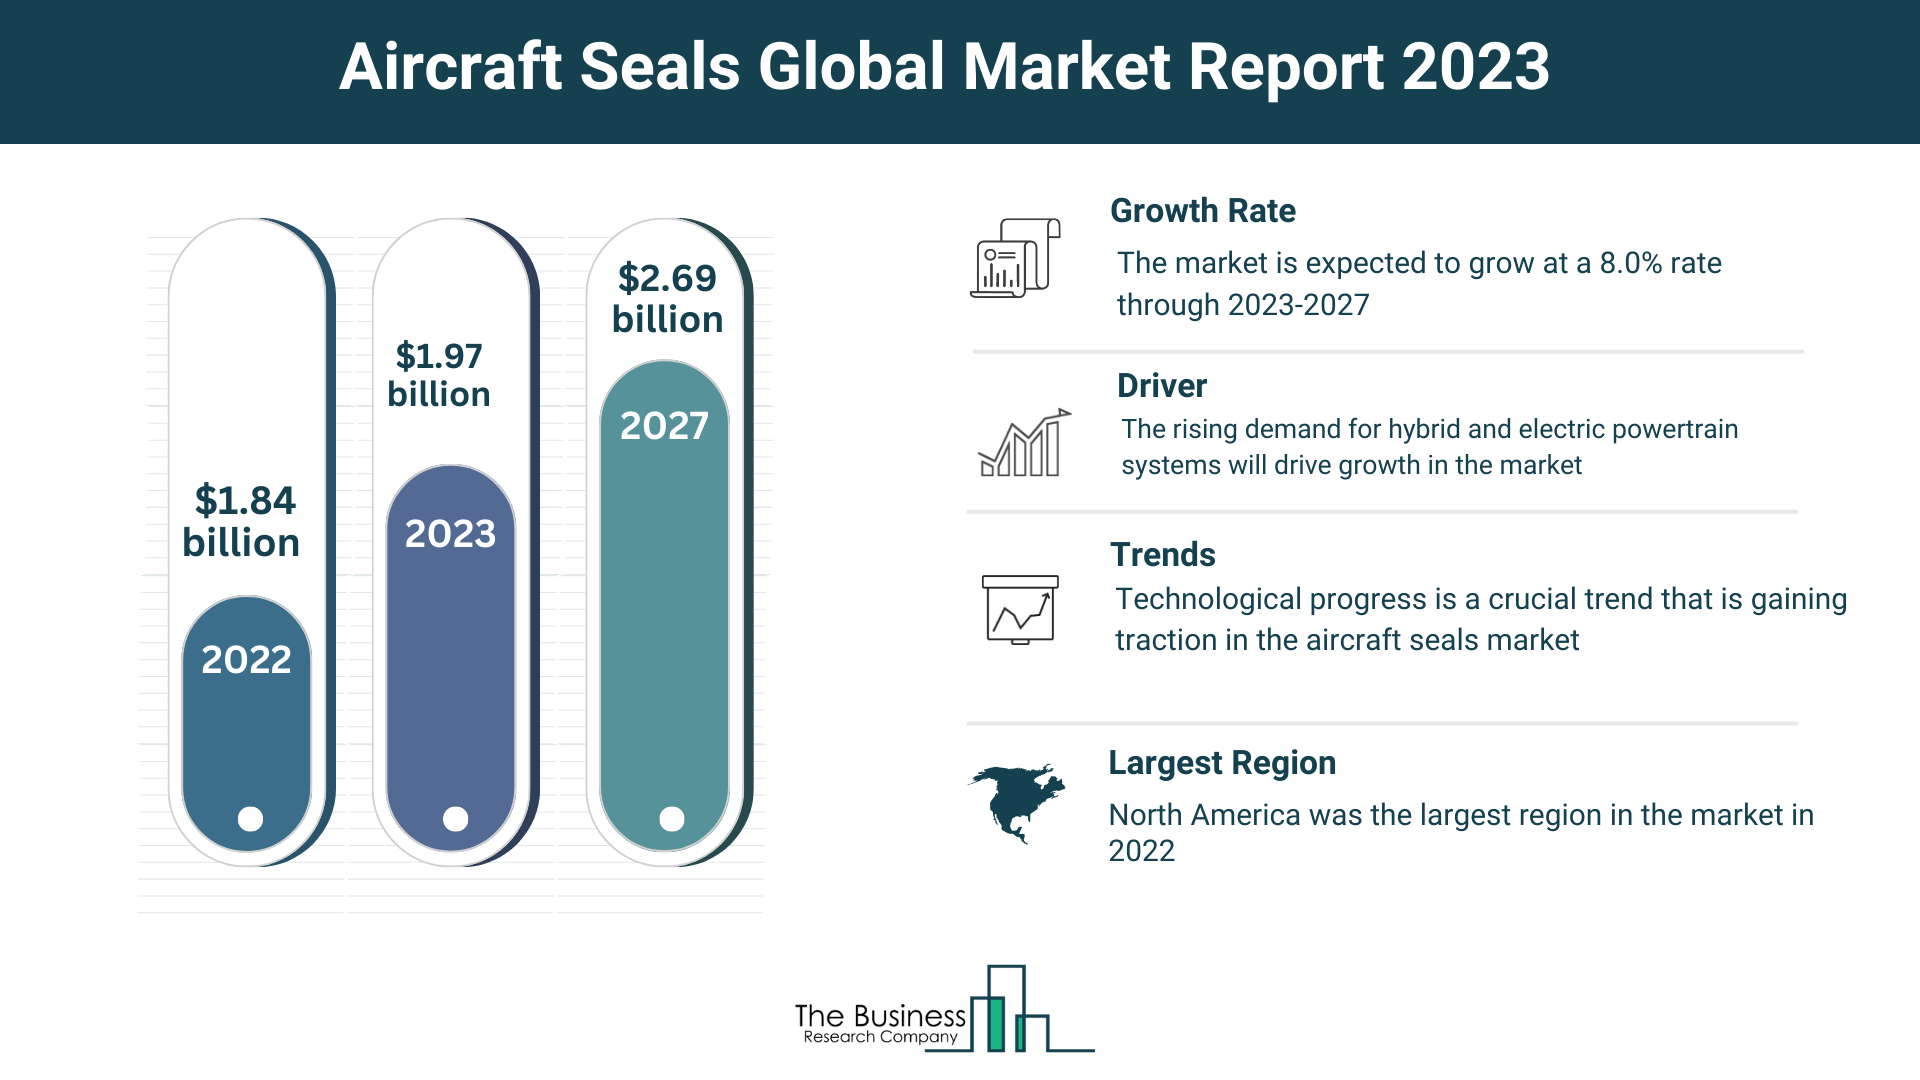 5 Key Takeaways From The Aircraft Seals Market Report 2023